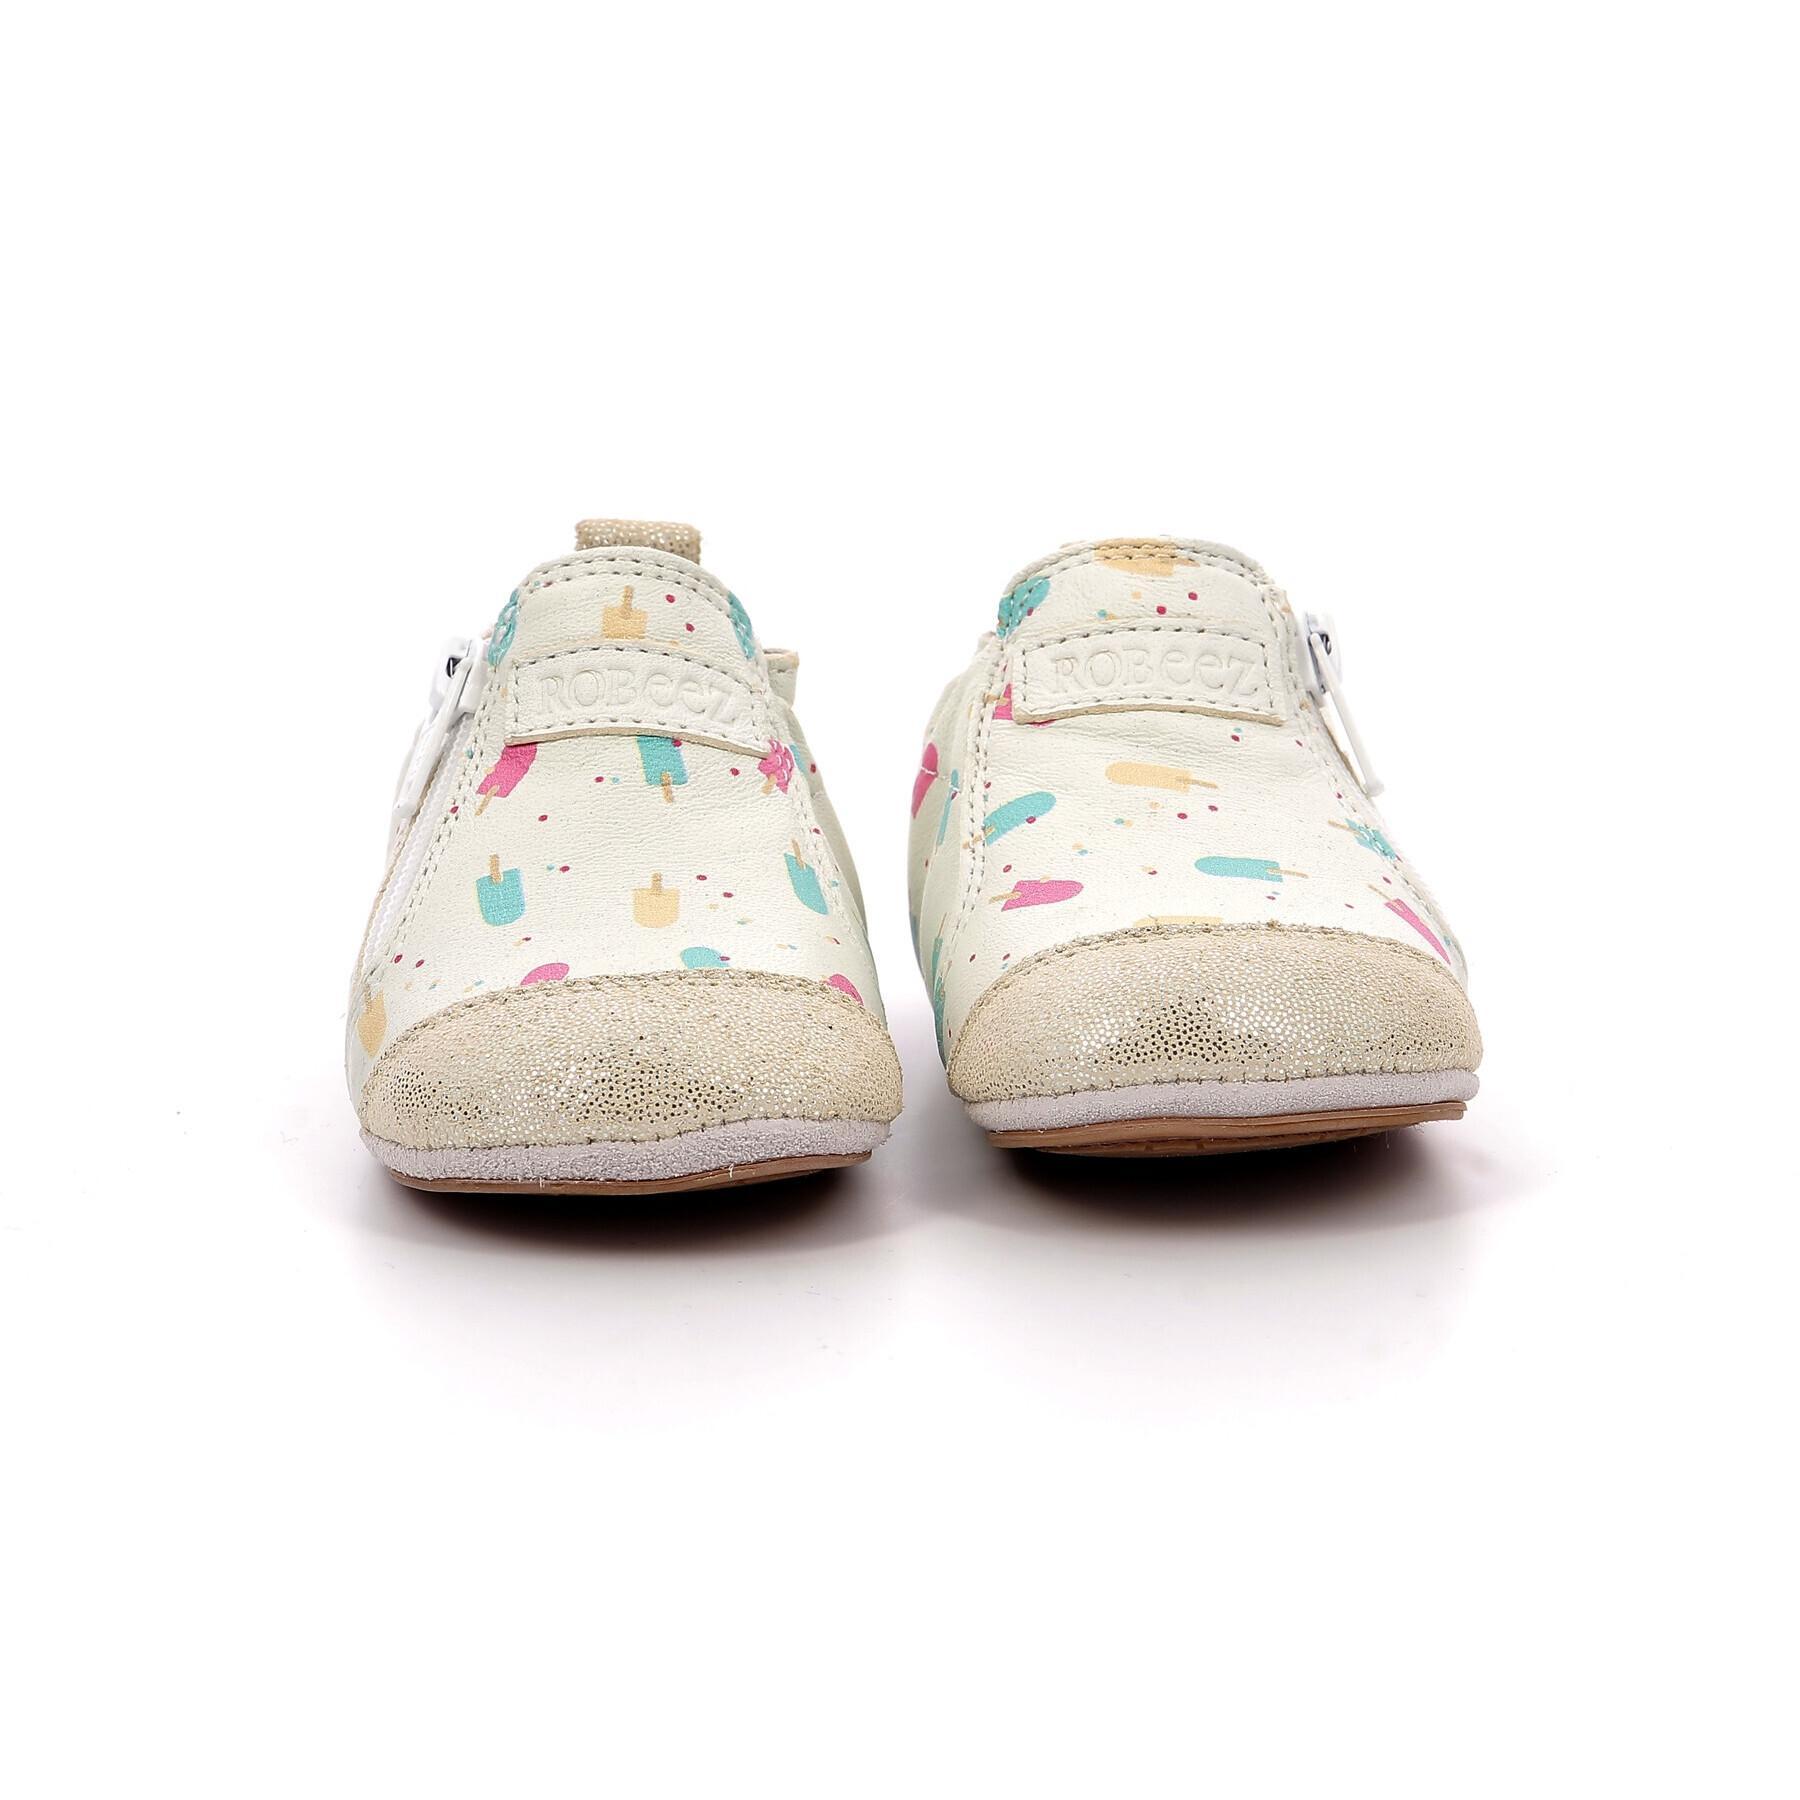 Baby girl slippers Robeez Confetti Ice